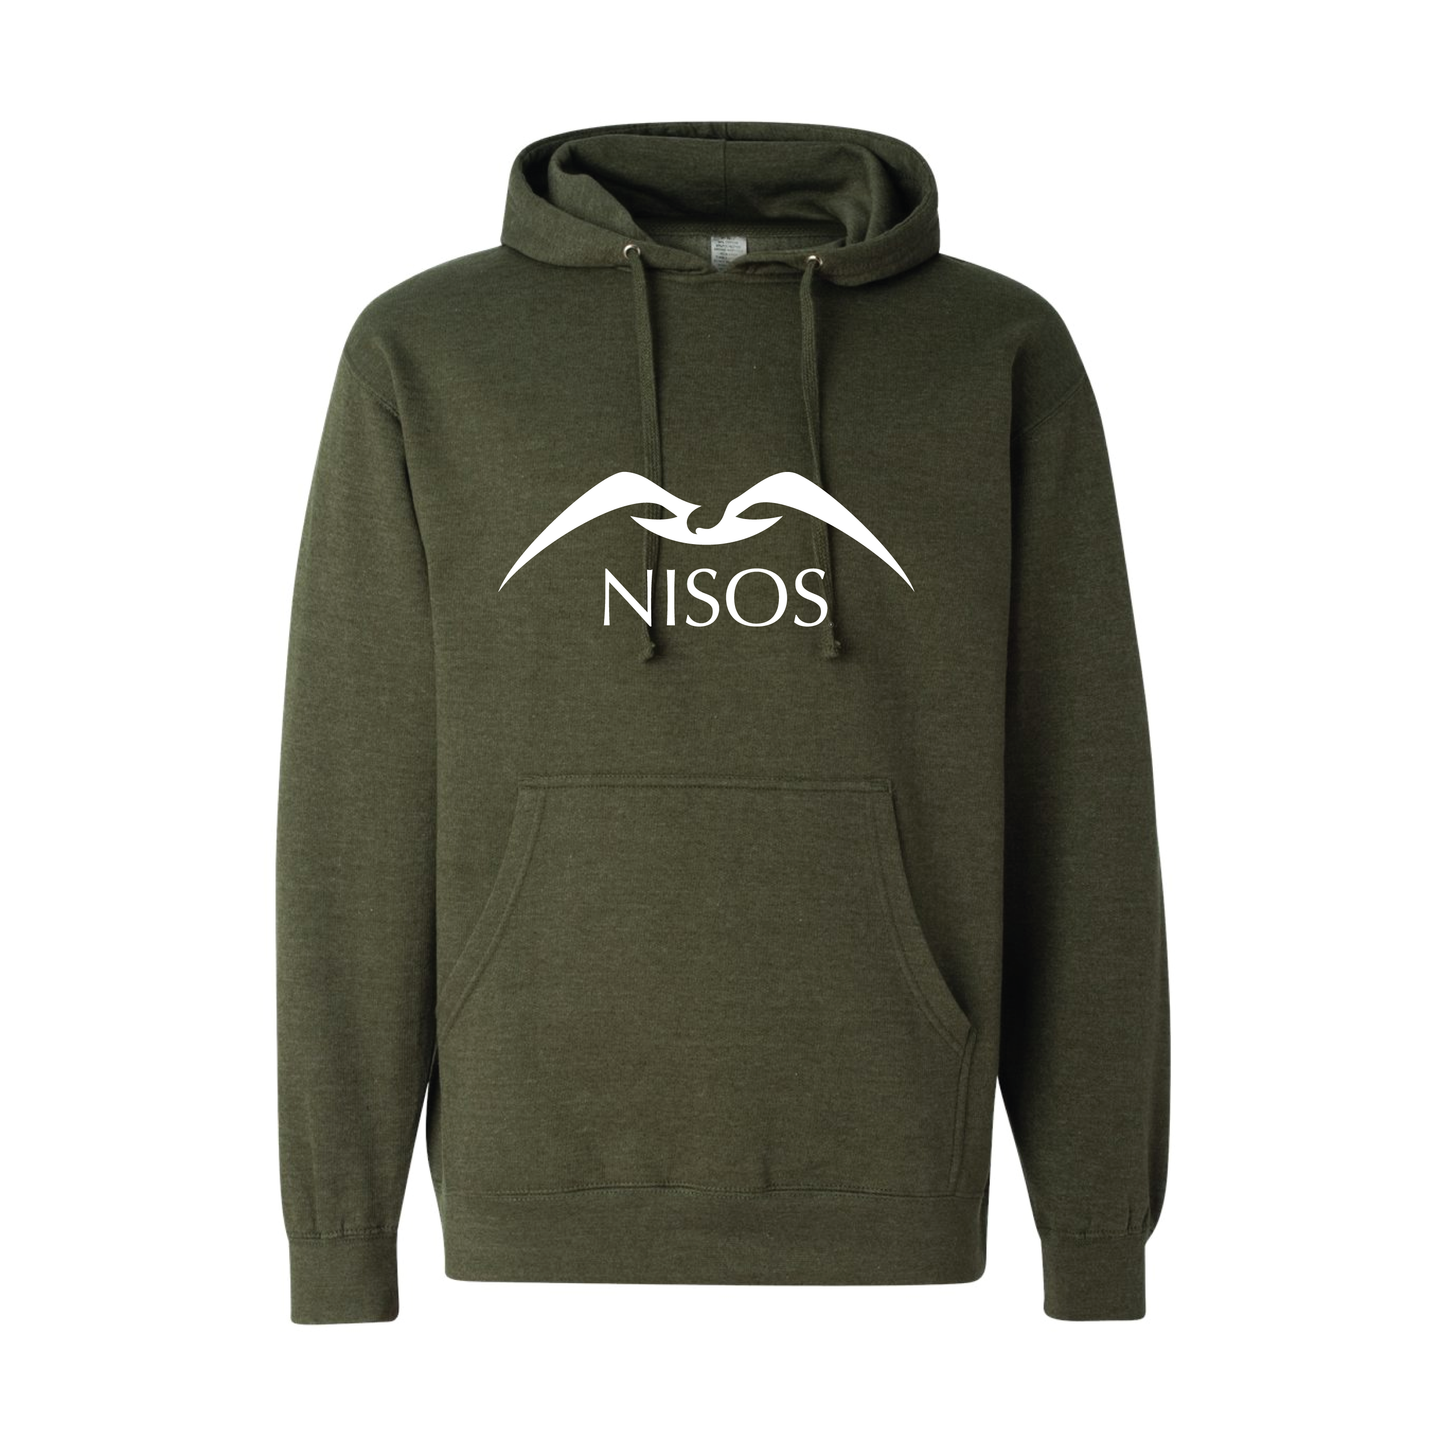 Nisos Indep. Trading Co. Midweight Hooded Sweatshirt in Army Heather